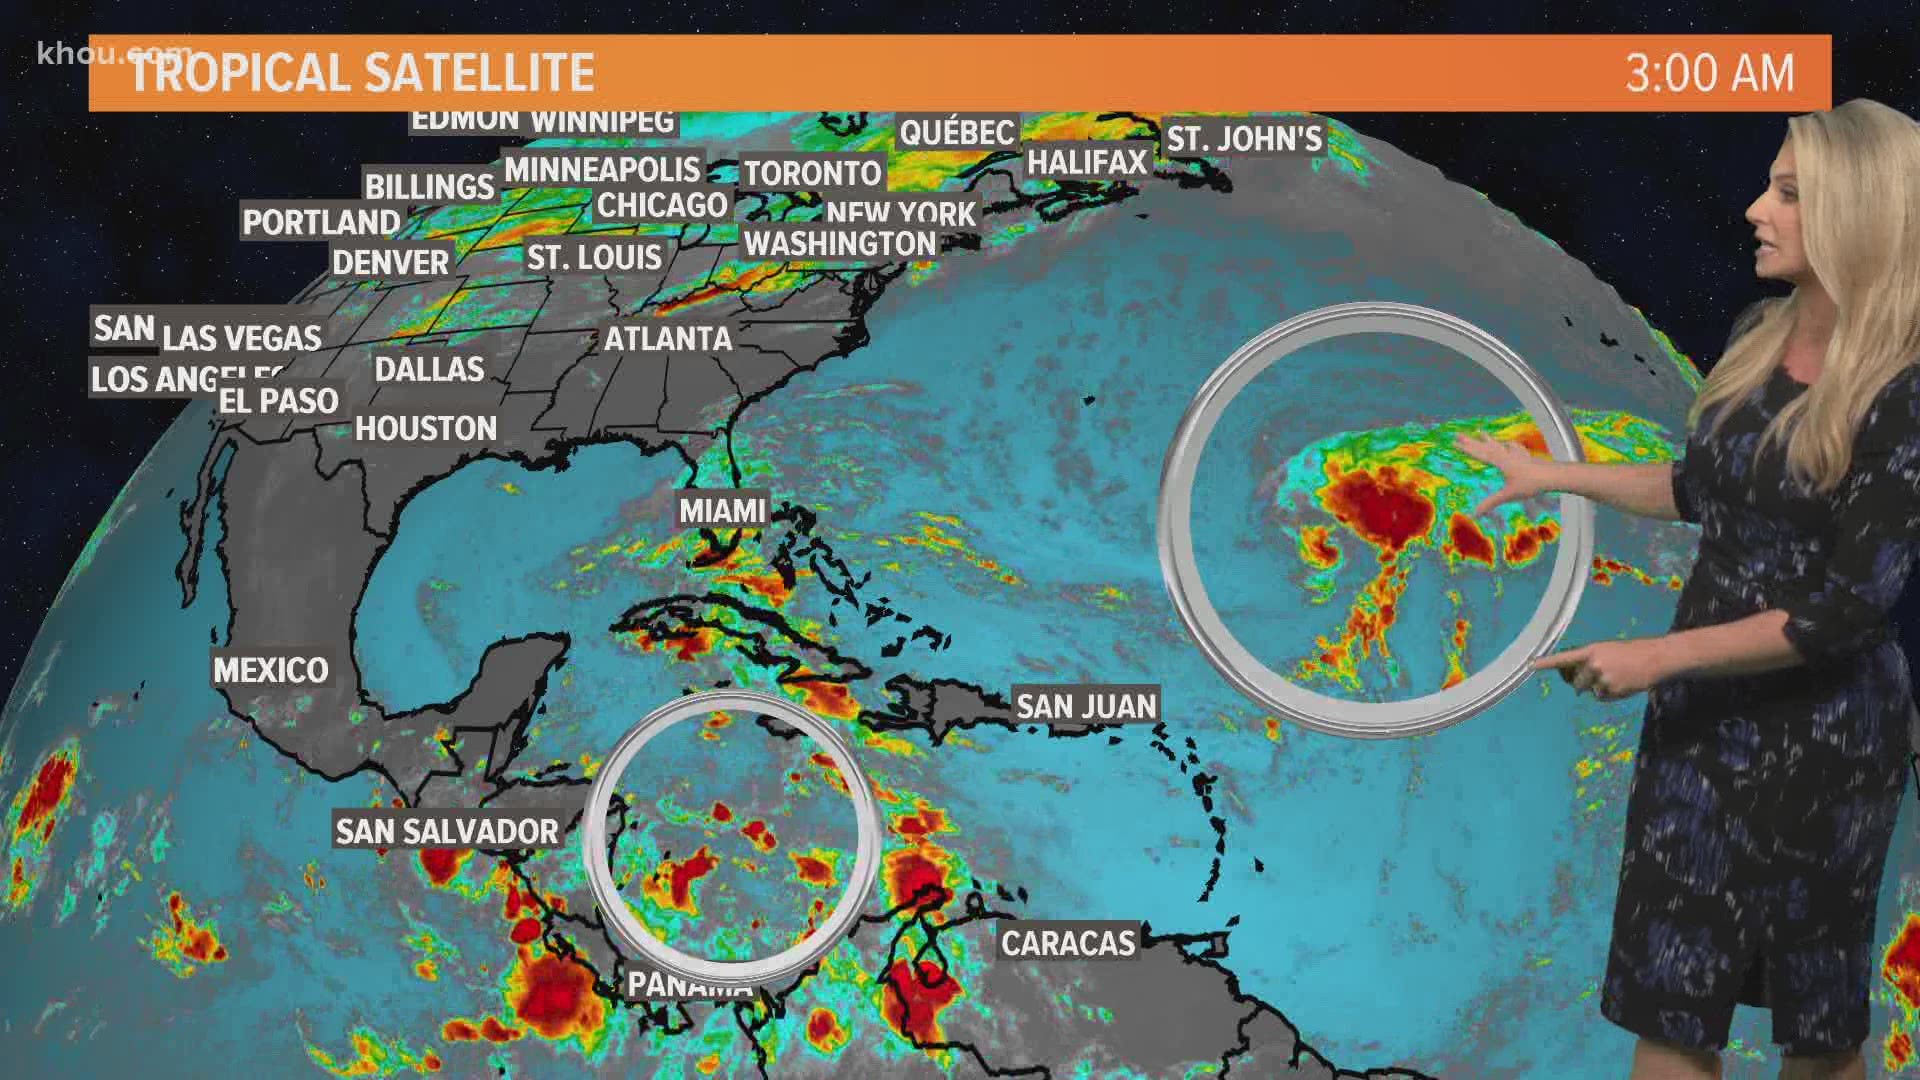 KHOU 11 Meteorologist Chita Craft says TS Epsilon is not a threat to the U.S. Coast, whether or not it becomes a hurricane. Houston's weather remains warm and muggy.